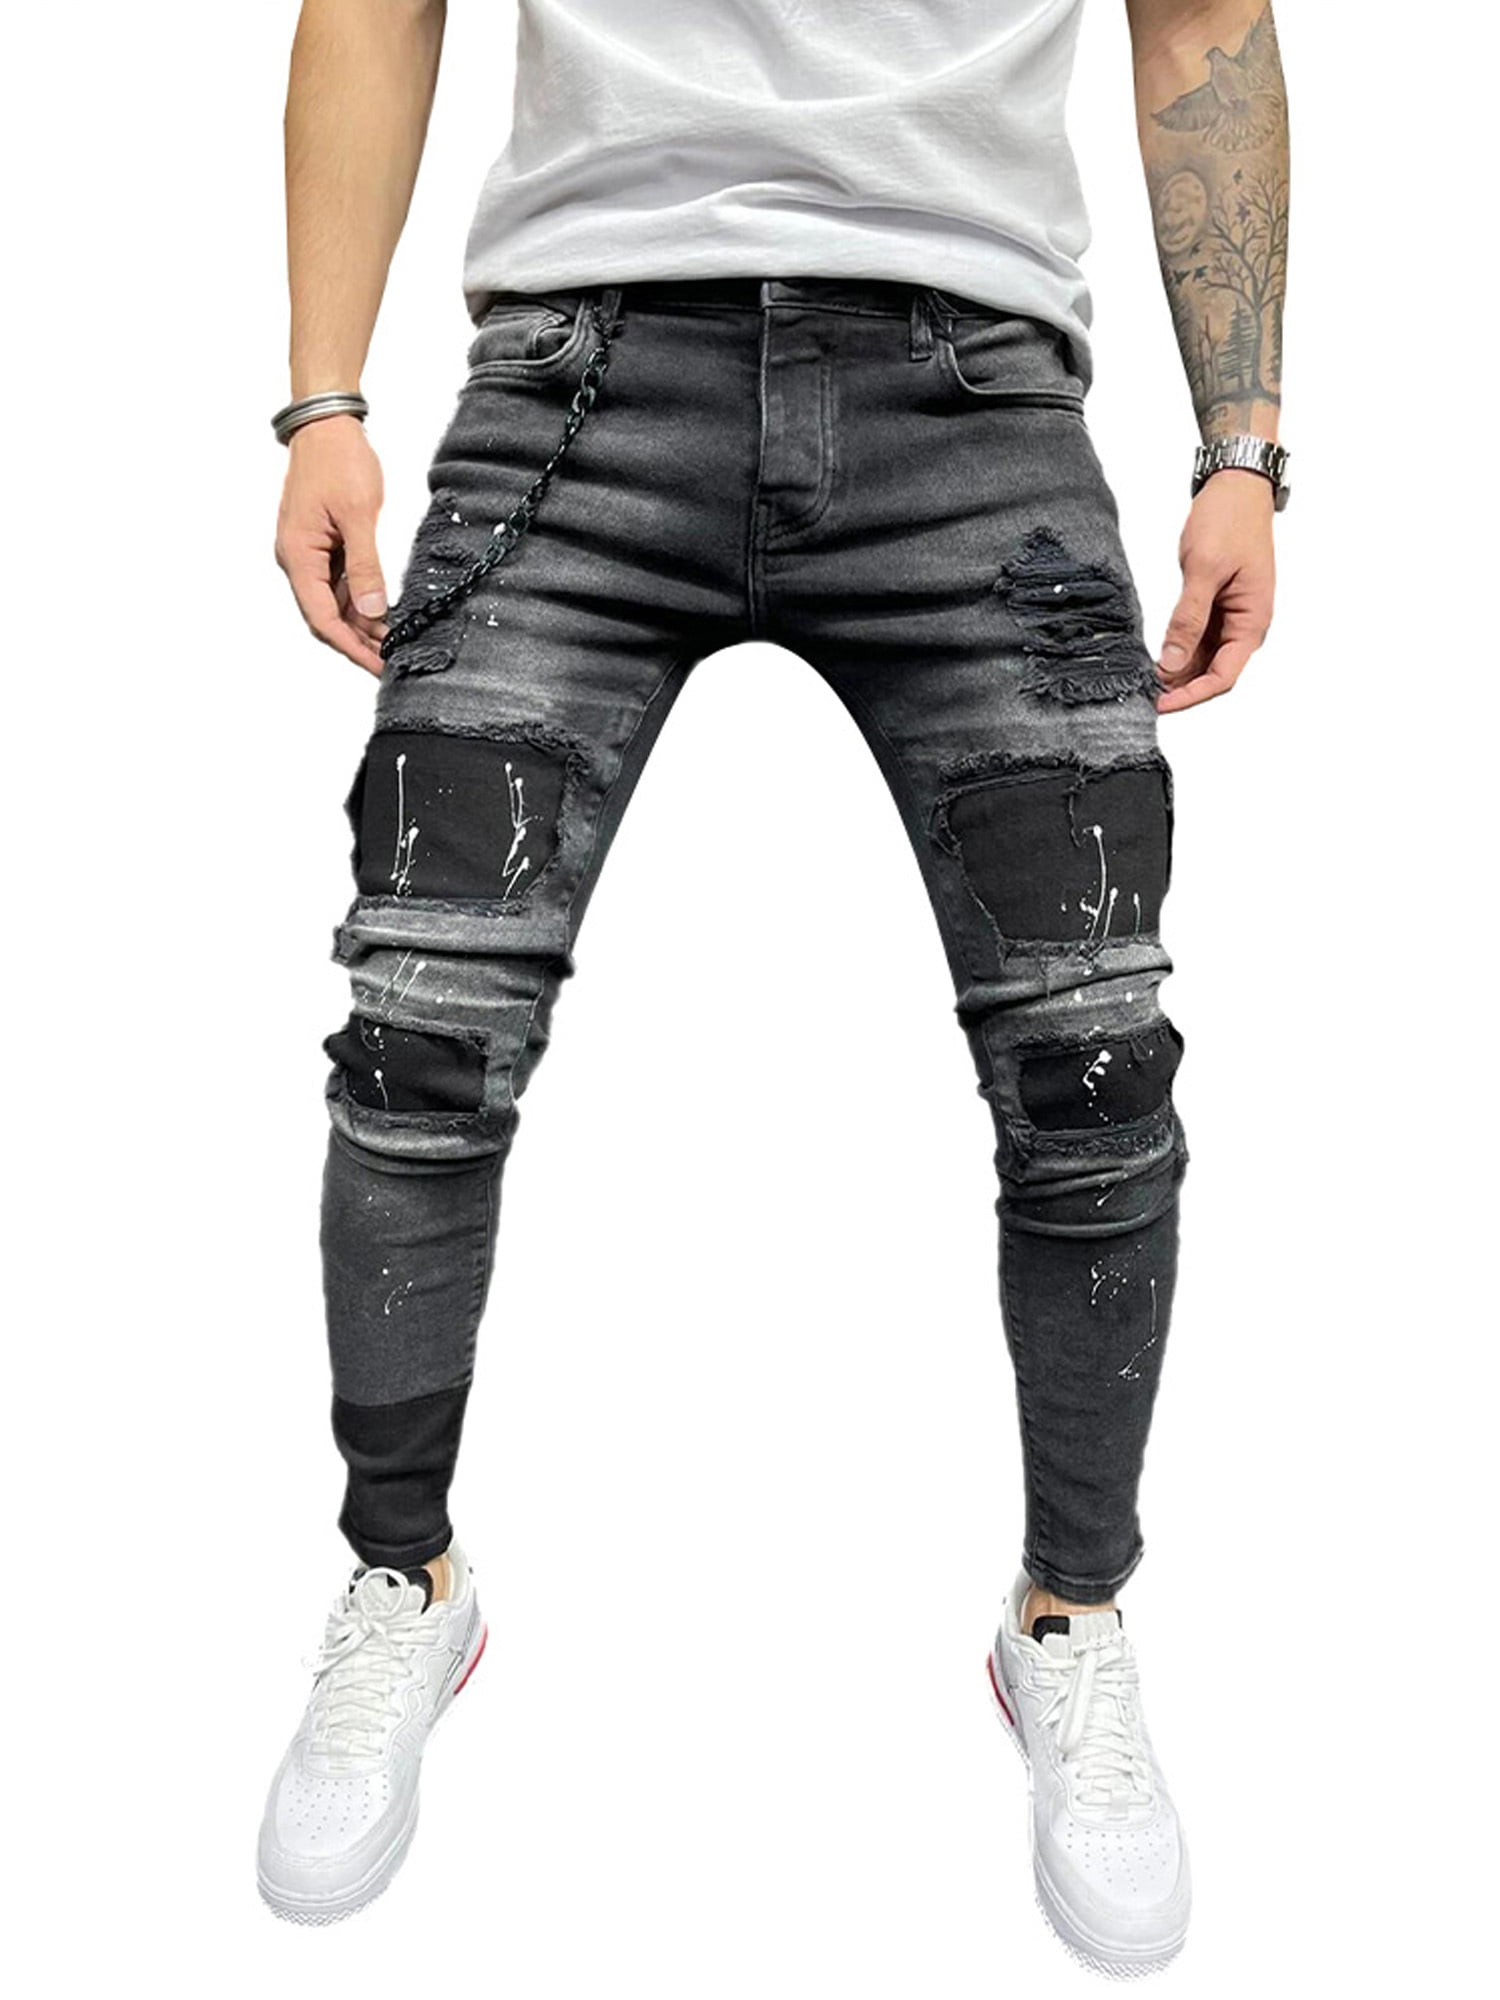 Mens Trousers Bottoms Slim Fit Distressed Frayed Ripped Jeans Denim Pants  Skinny